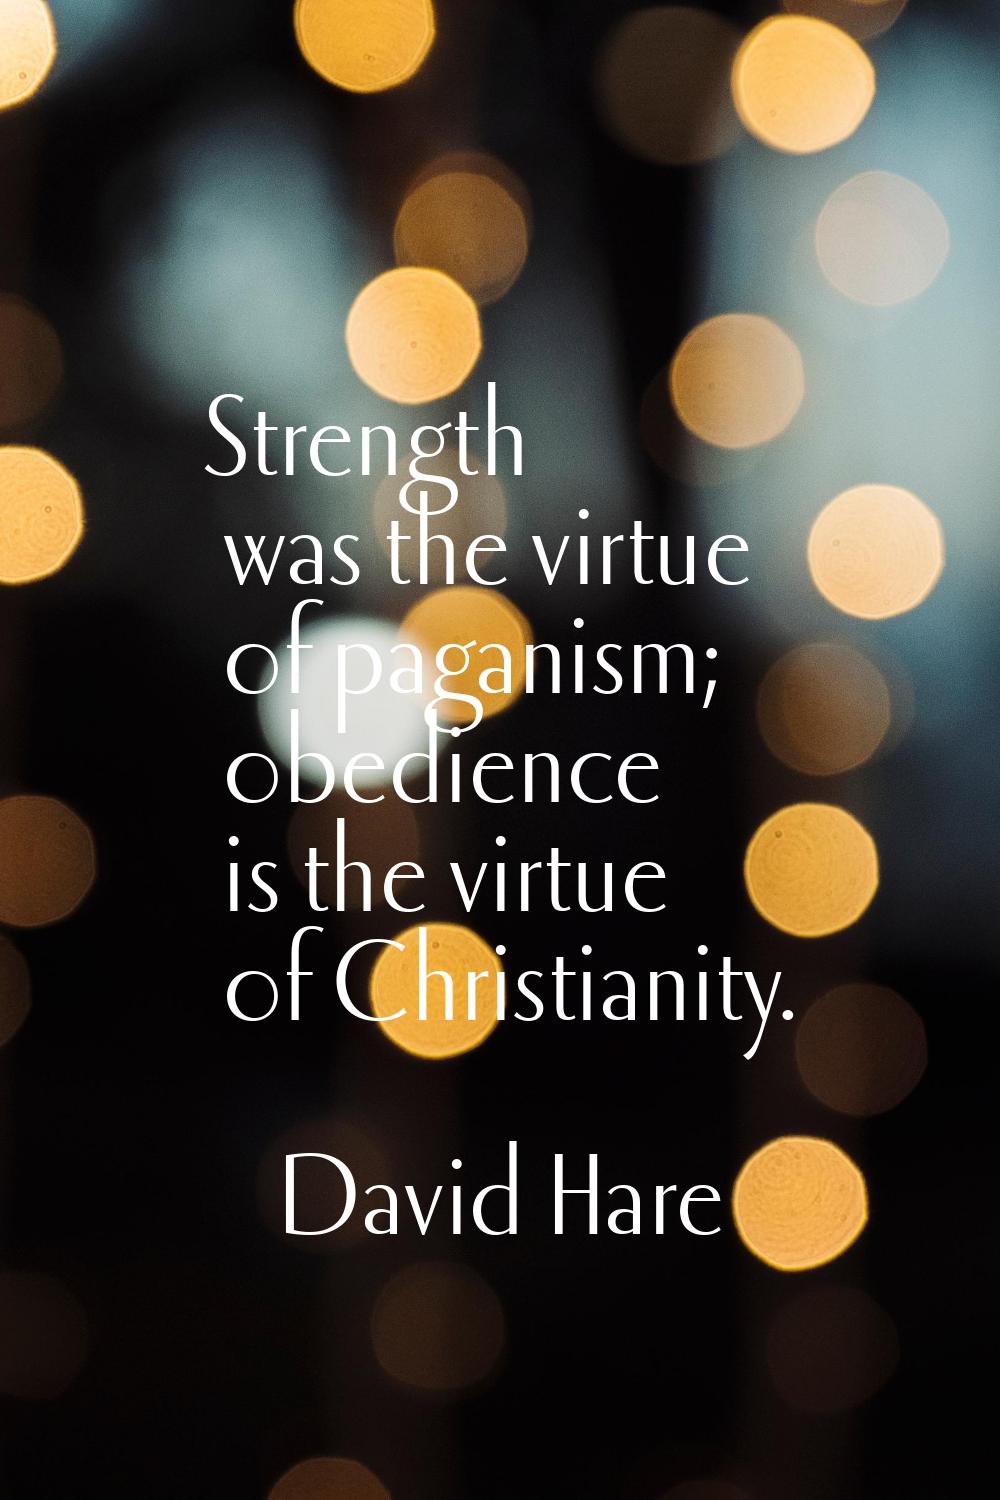 Strength was the virtue of paganism; obedience is the virtue of Christianity.